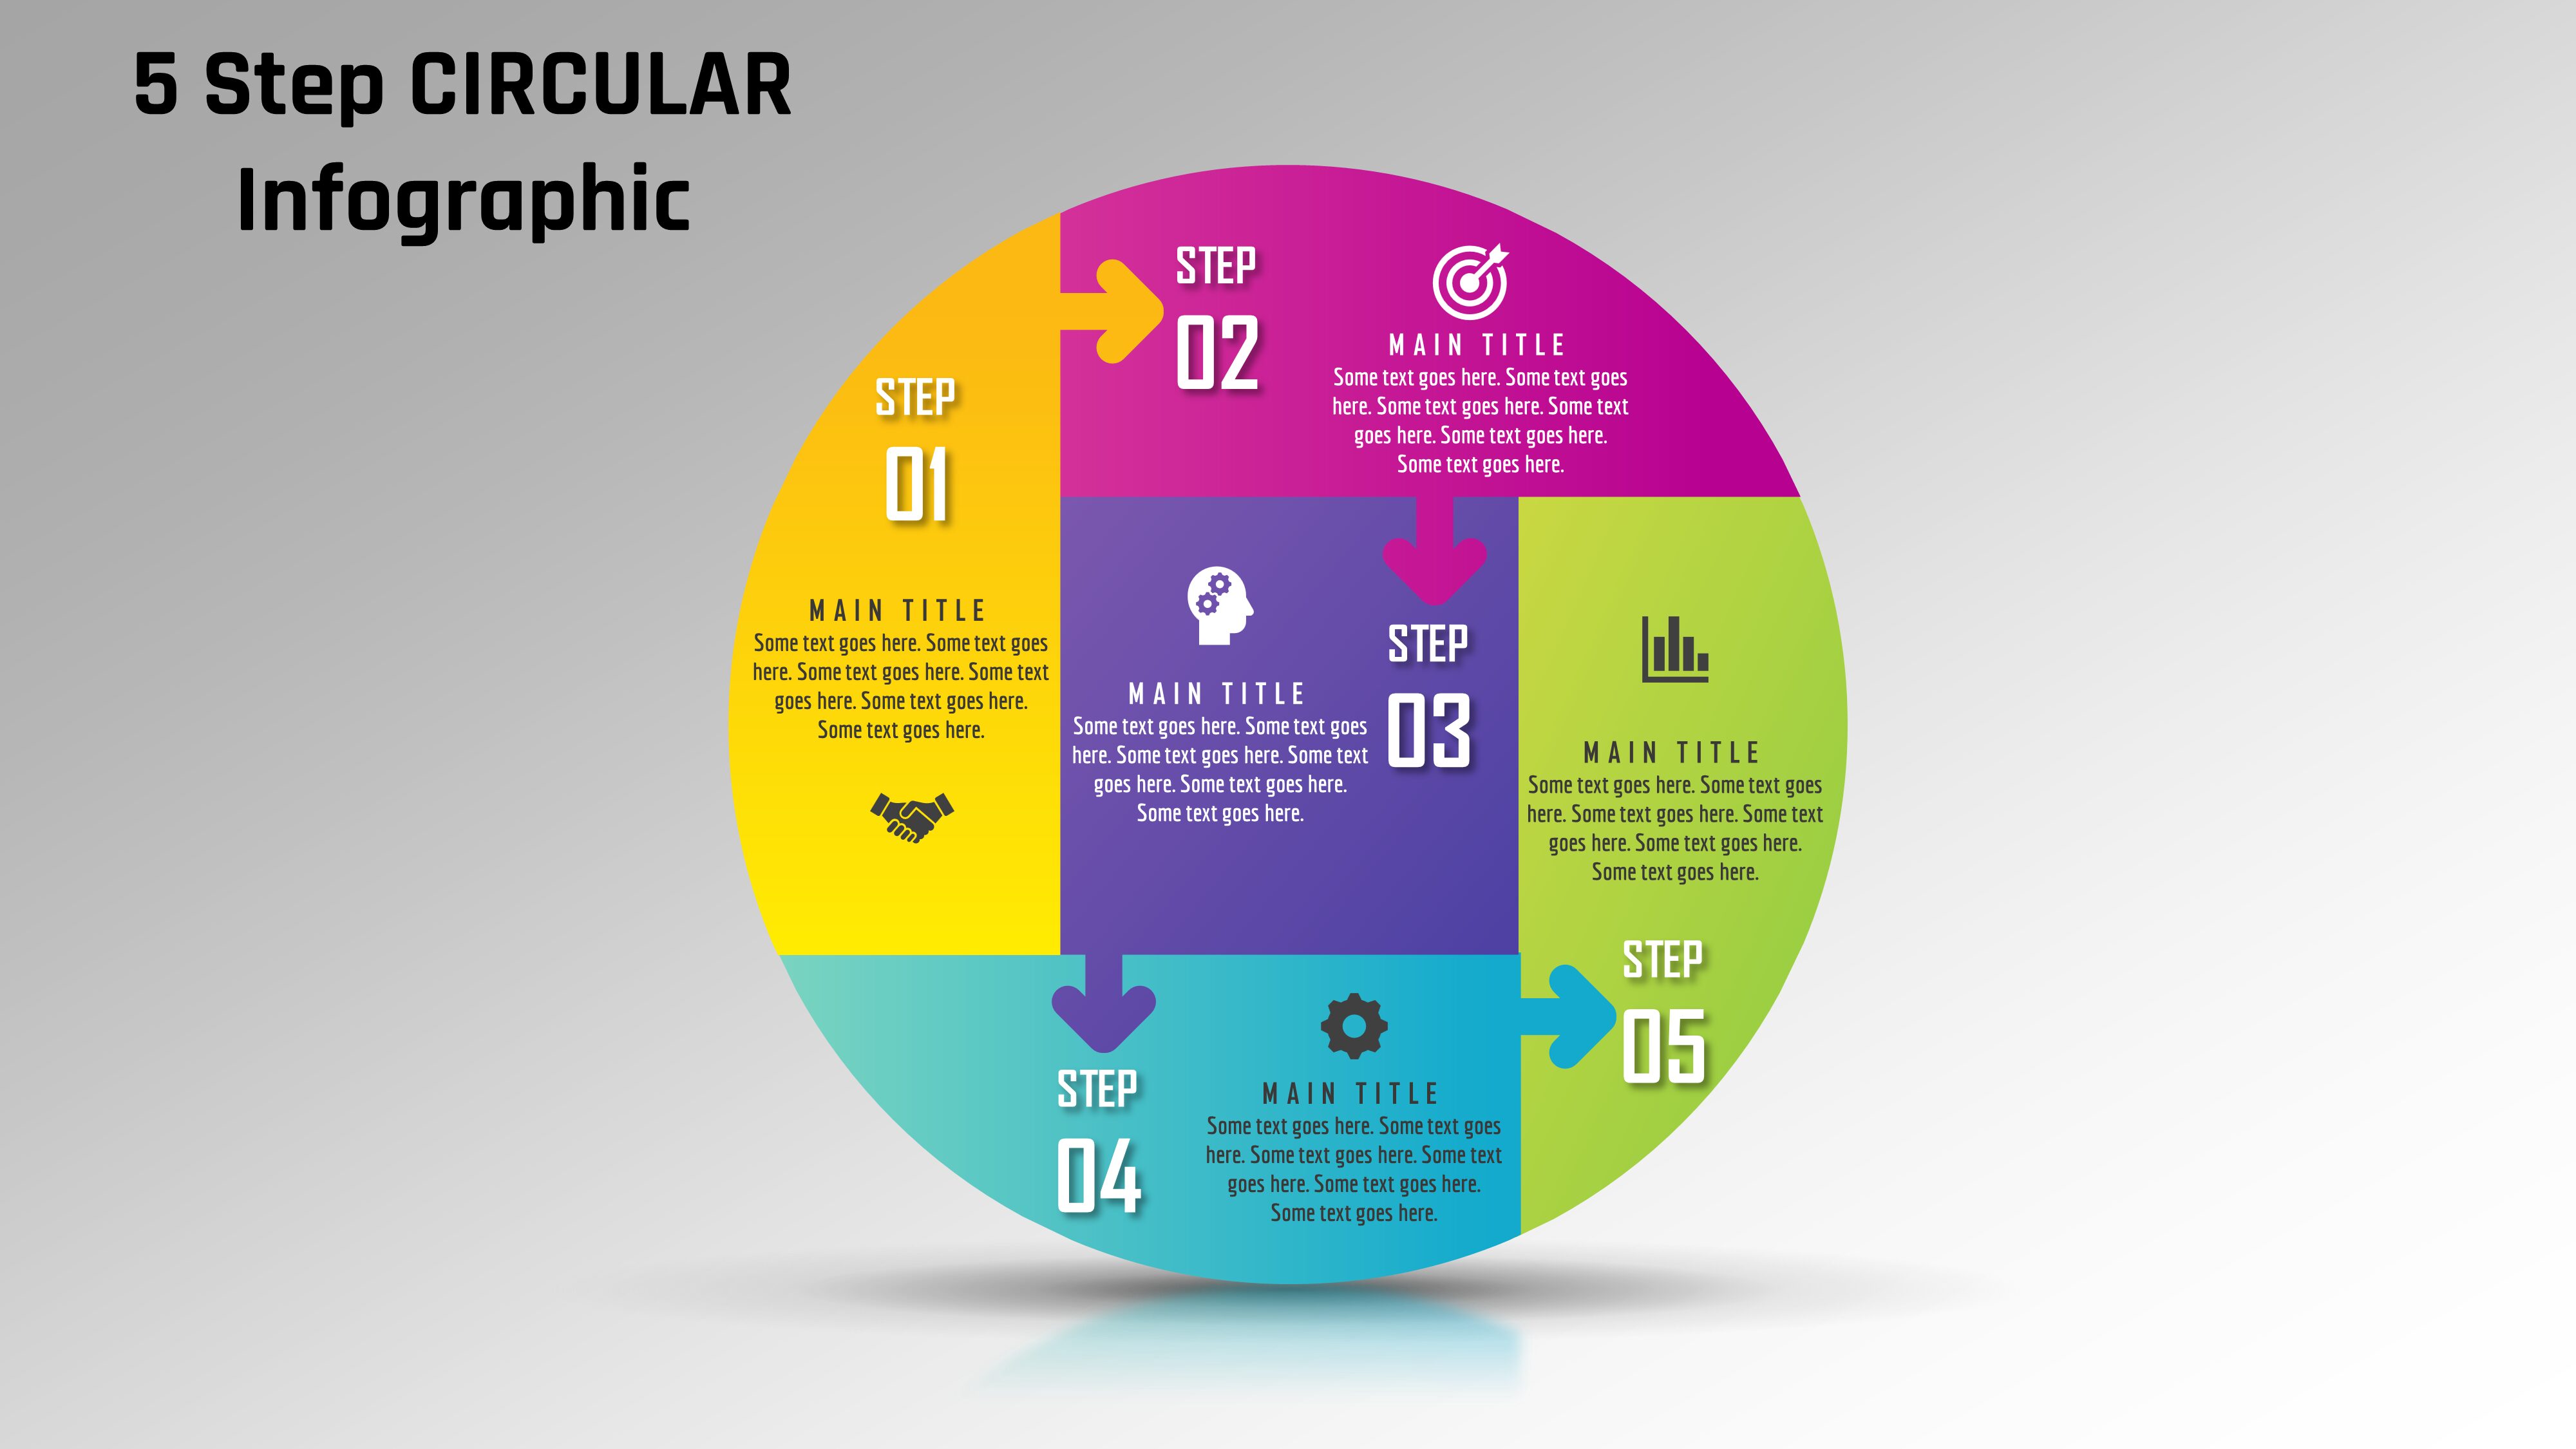 28powerpoint 5 Step Circular Infographic Powerup With Powerpoint 3482